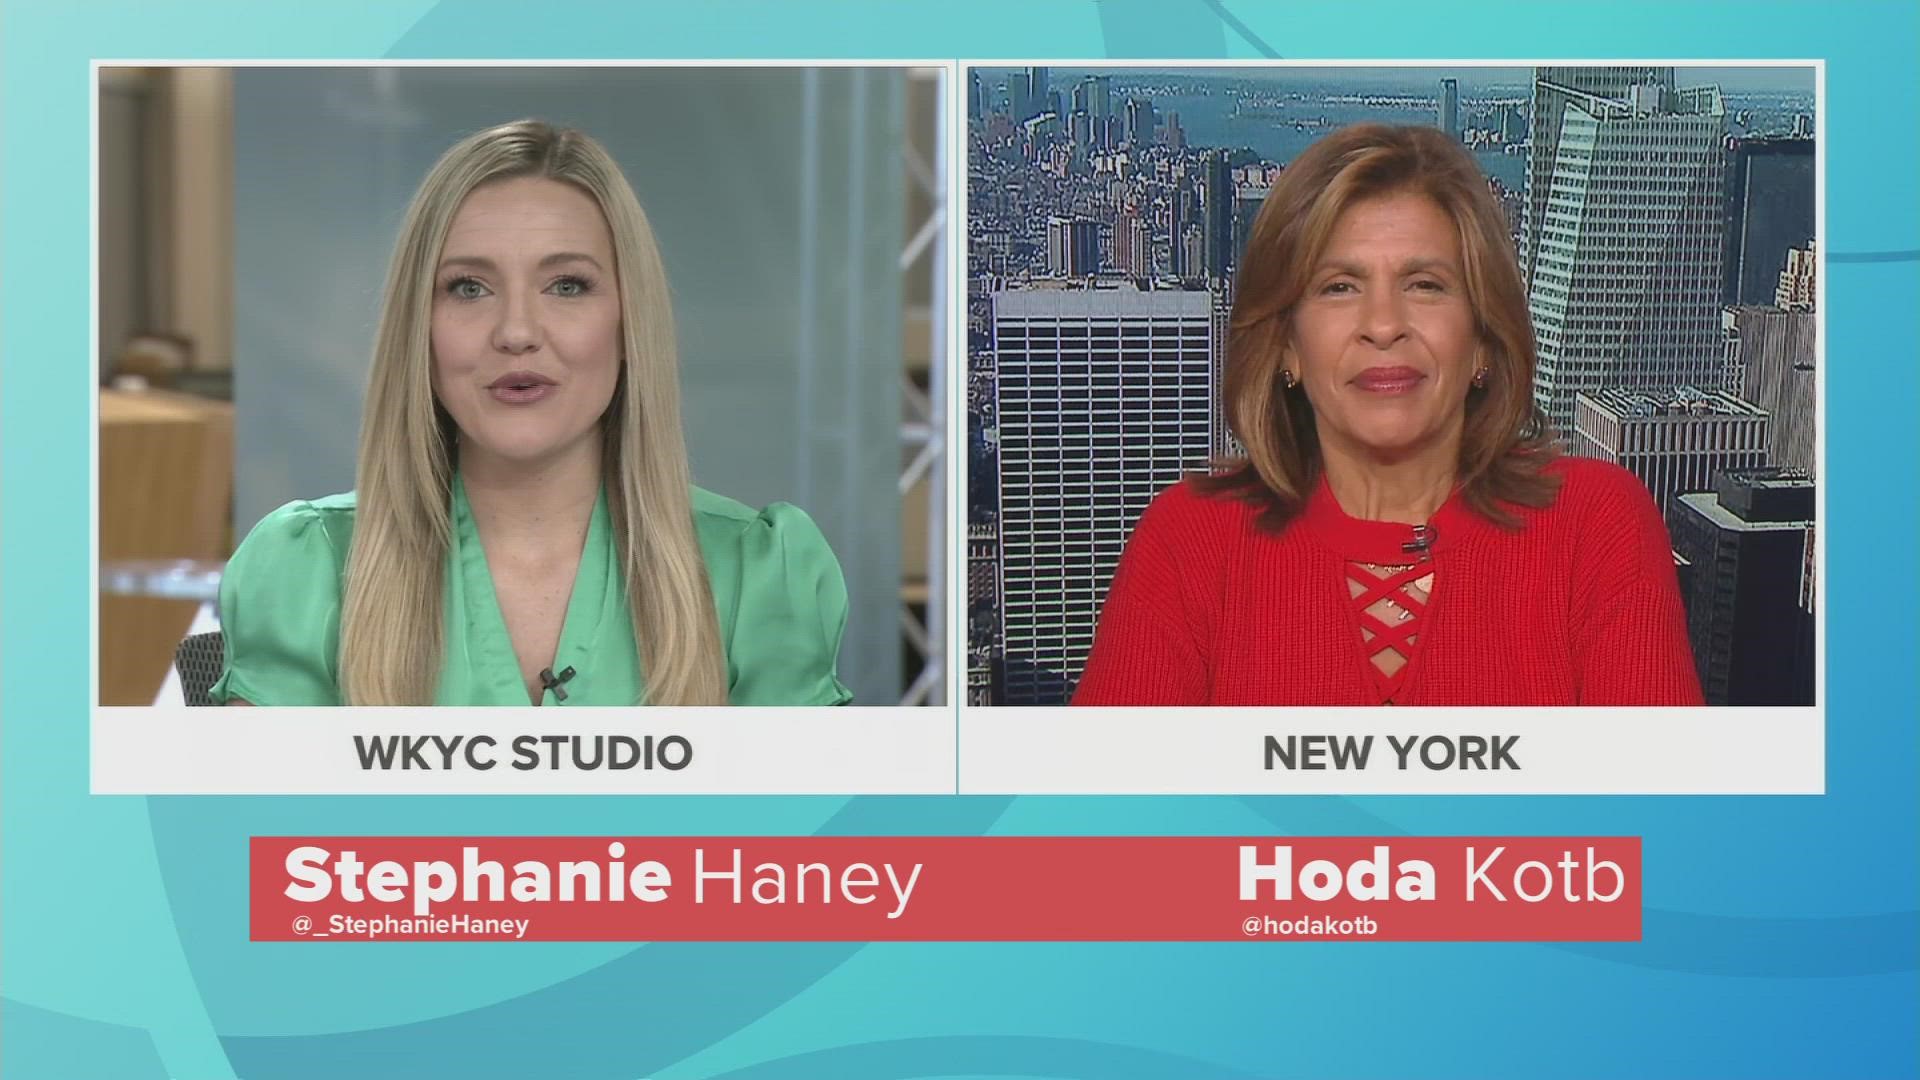 Chatting with 3News’ Stephanie Haney, Hoda Kotb shares how she came up with the idea for her popular Making Space podcast.